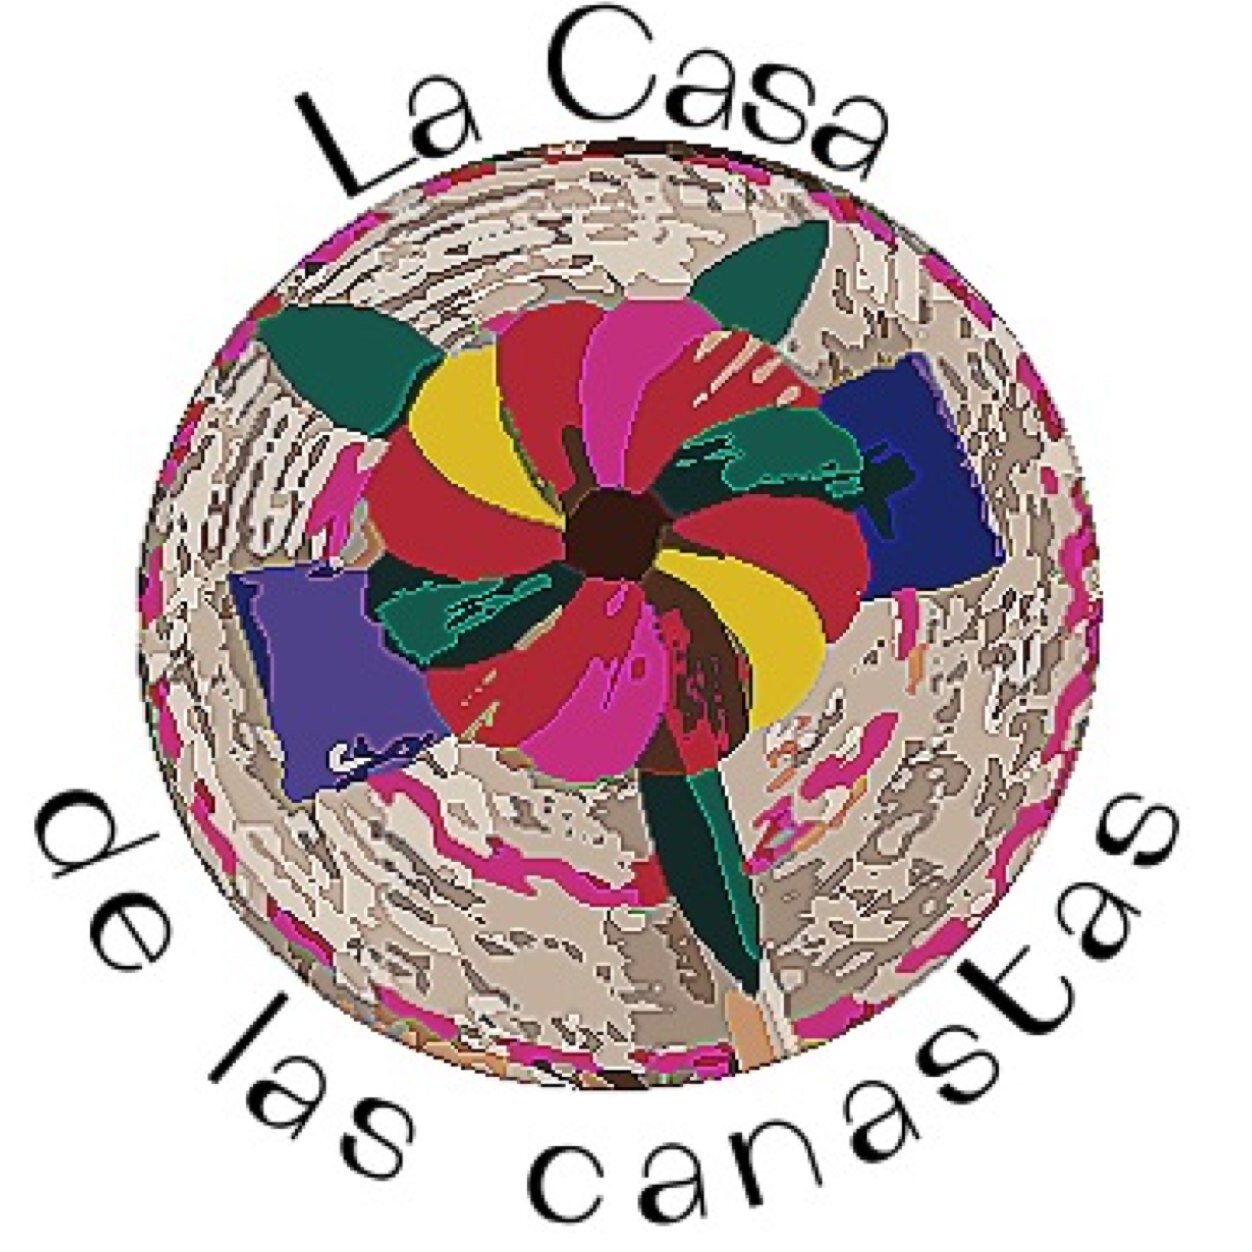 La Casa de Las Canastas is a small business that is responsible for the creation and distribution of Mexican handicrafts made in the State of Mexico.